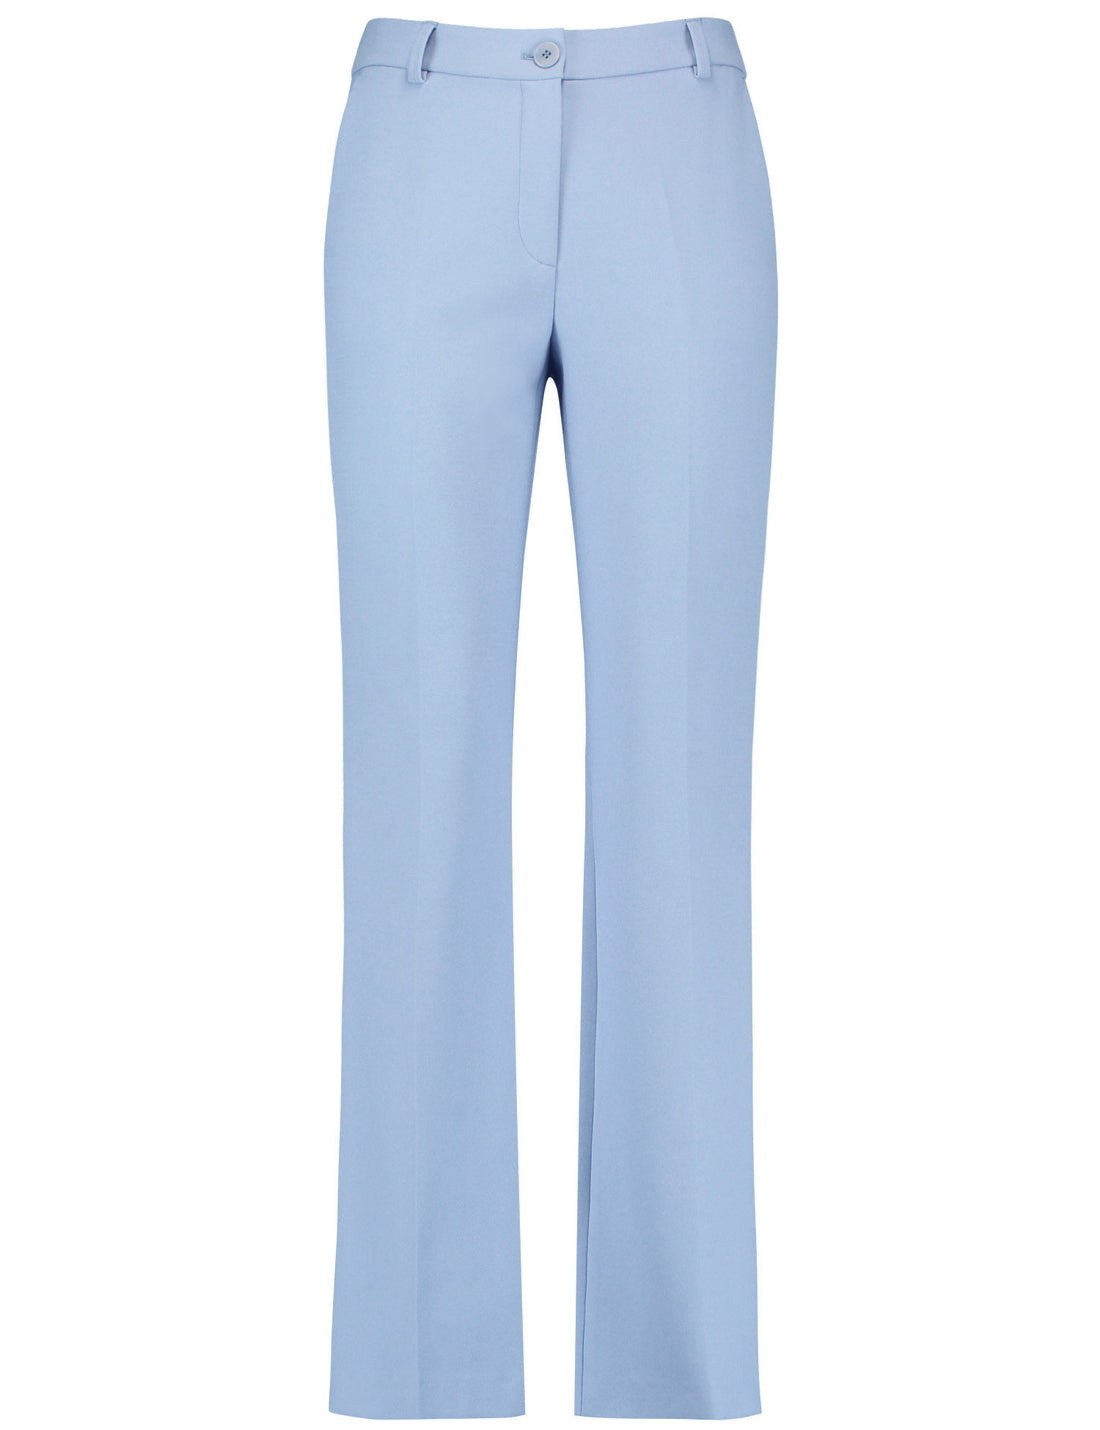 Slightly Flared Stretch Trousers_320002-31333_80933_02